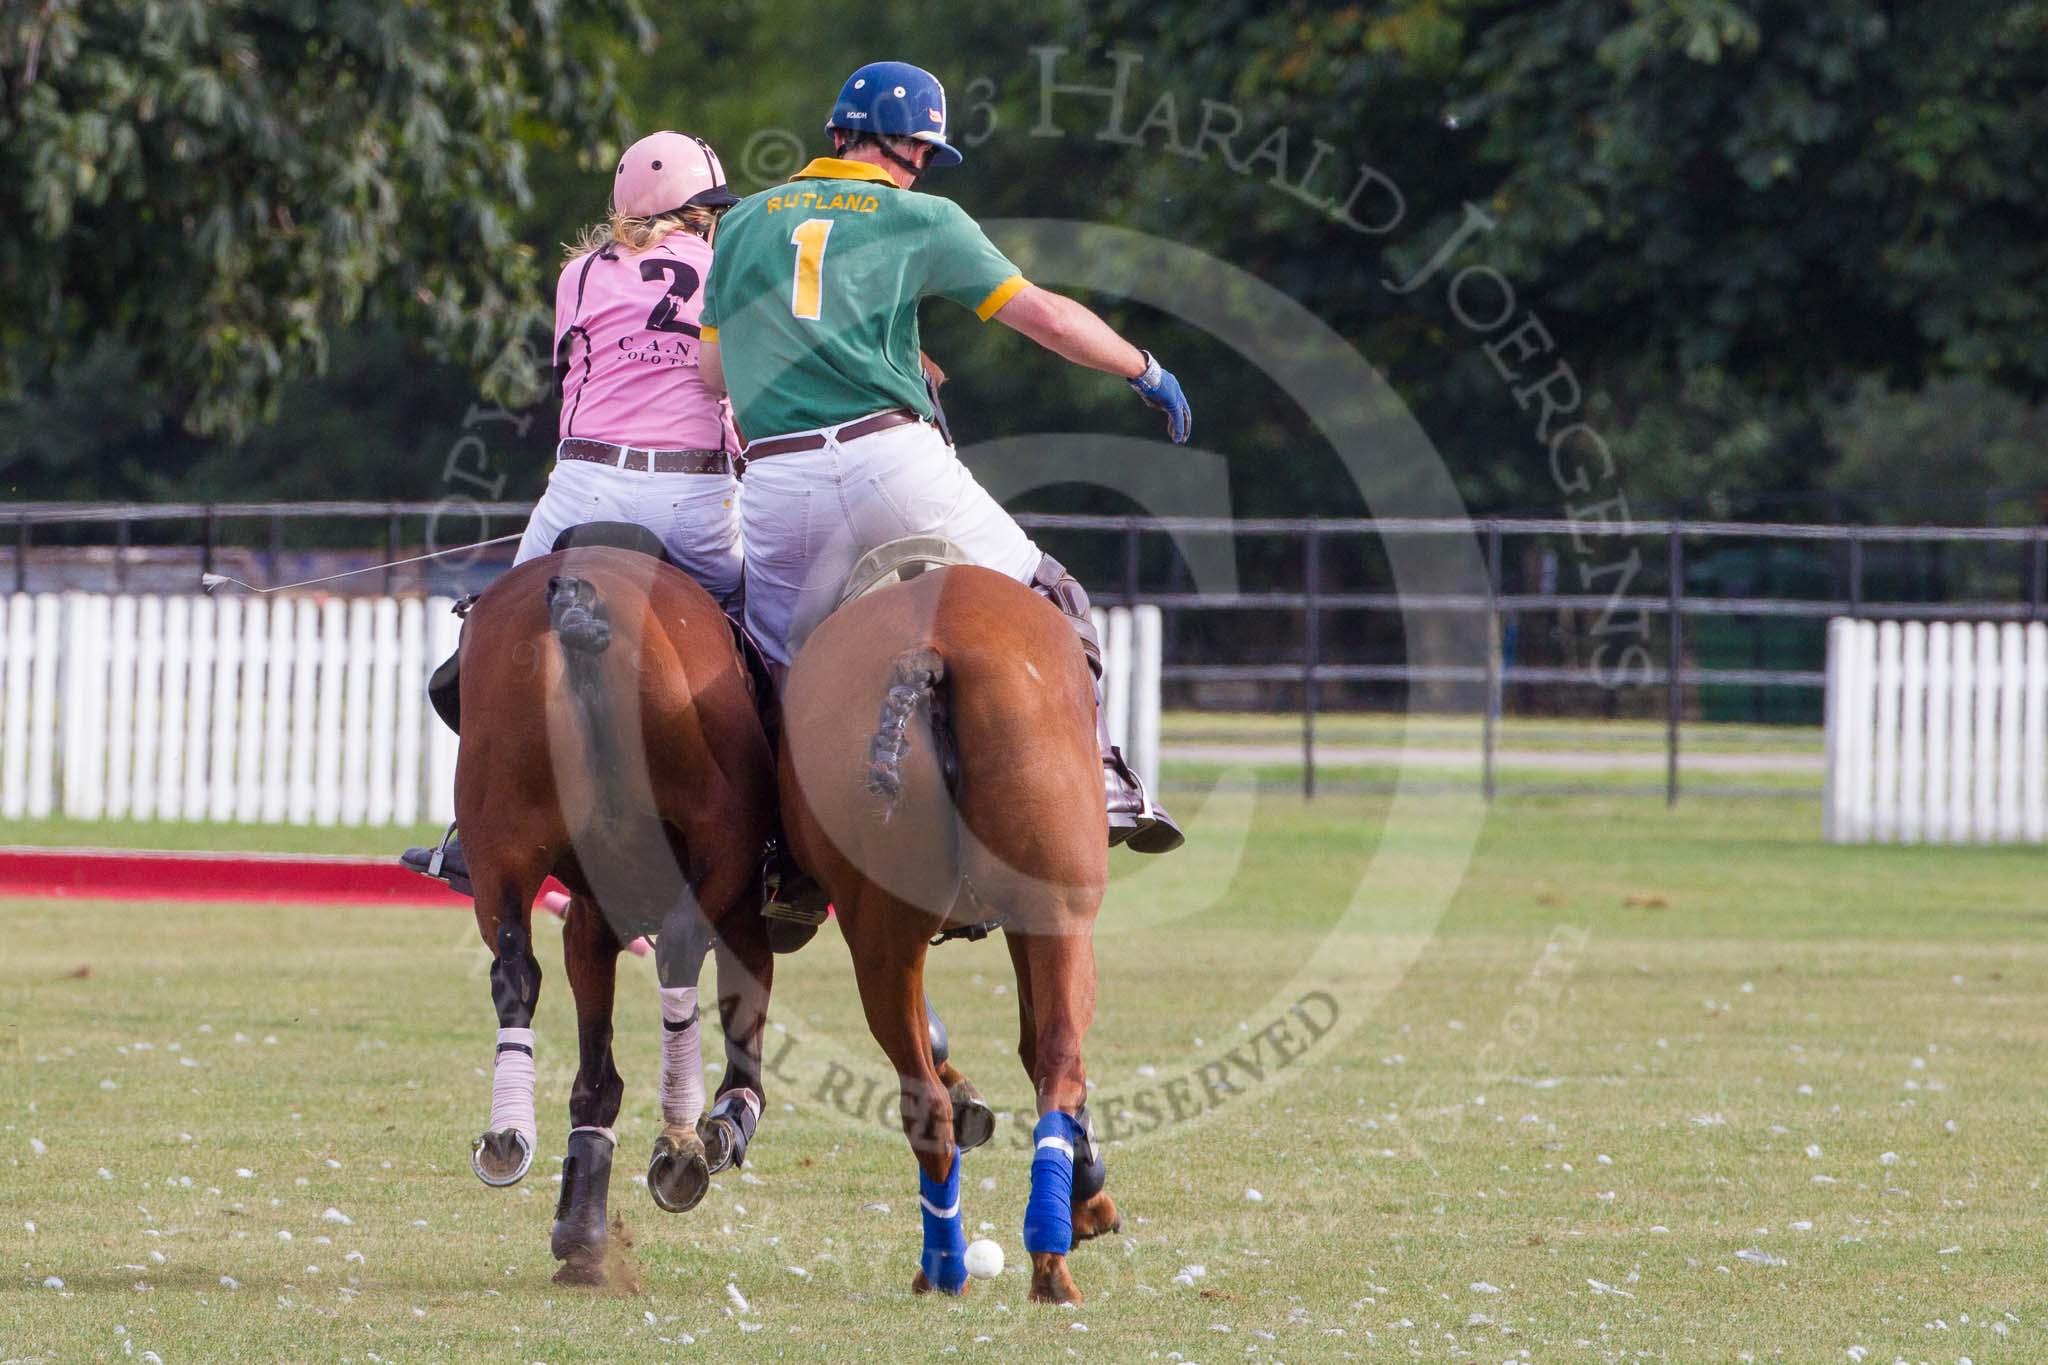 DBPC Polo in the Park 2013, Final of the Tusk Trophy (4 Goals), Rutland vs C.A.N.I..
Dallas Burston Polo Club, ,
Southam,
Warwickshire,
United Kingdom,
on 01 September 2013 at 16:38, image #600